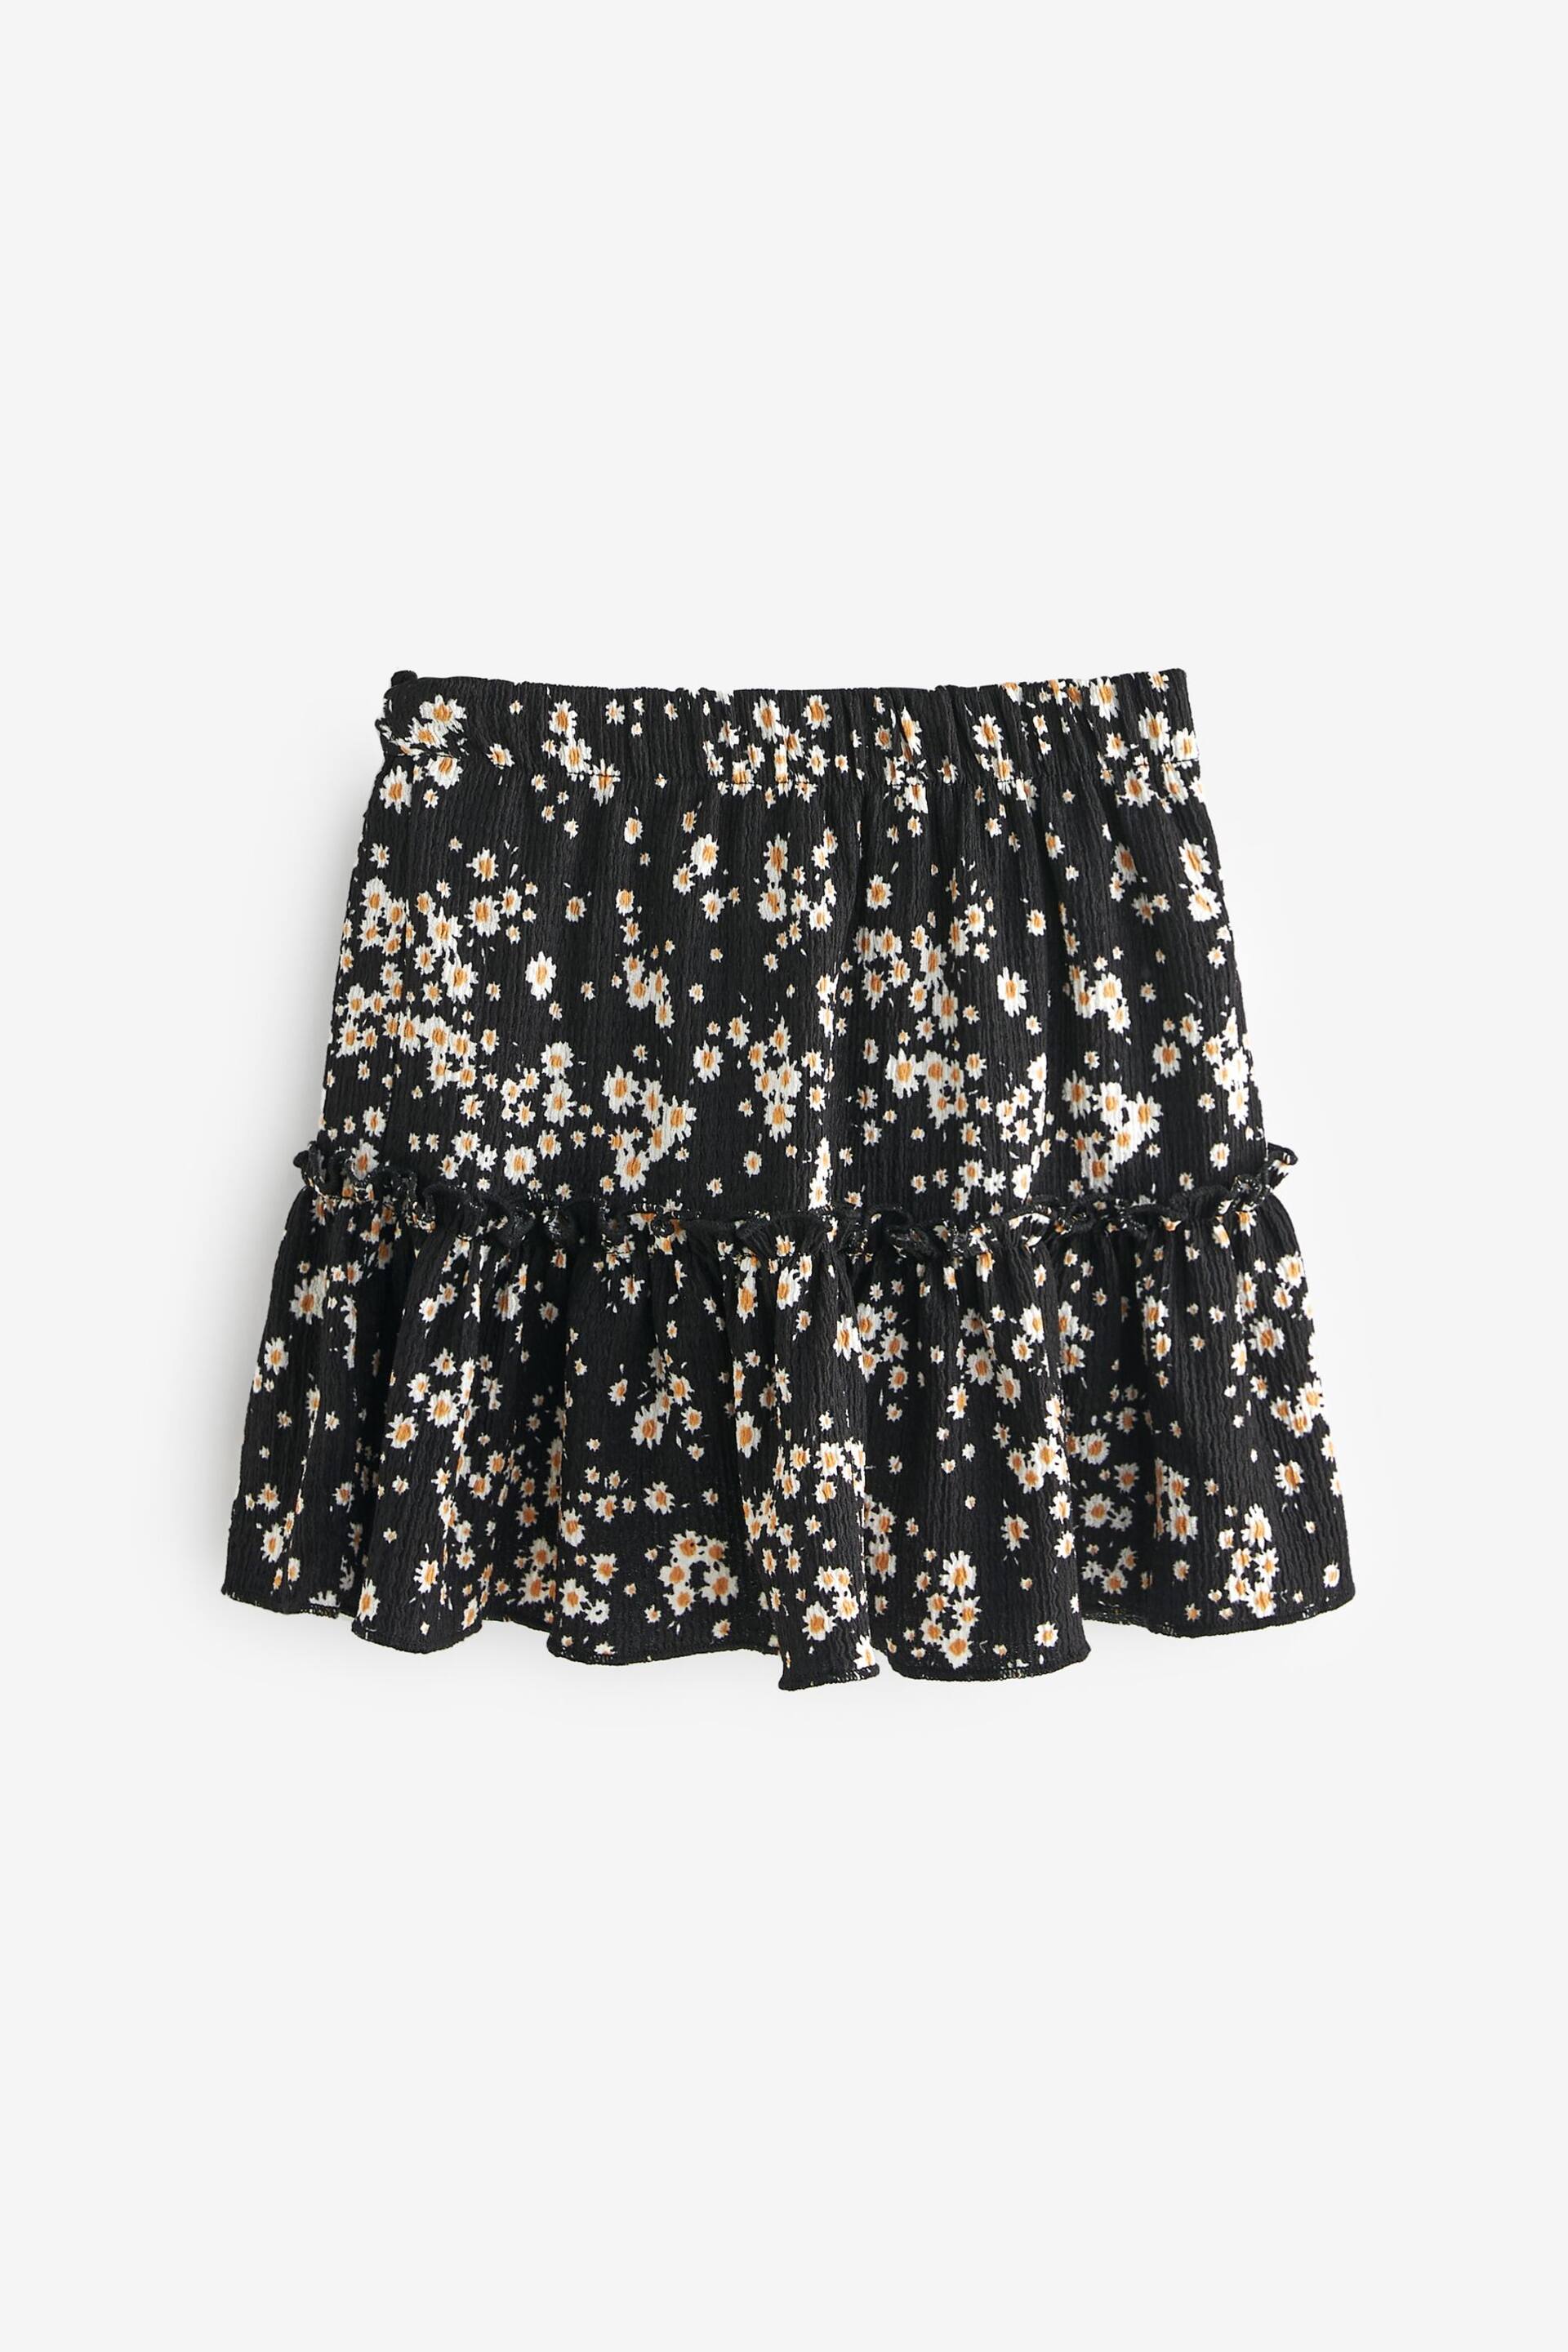 Black Floral Ditsy Wrap Skirt (3-16yrs) - Image 6 of 7